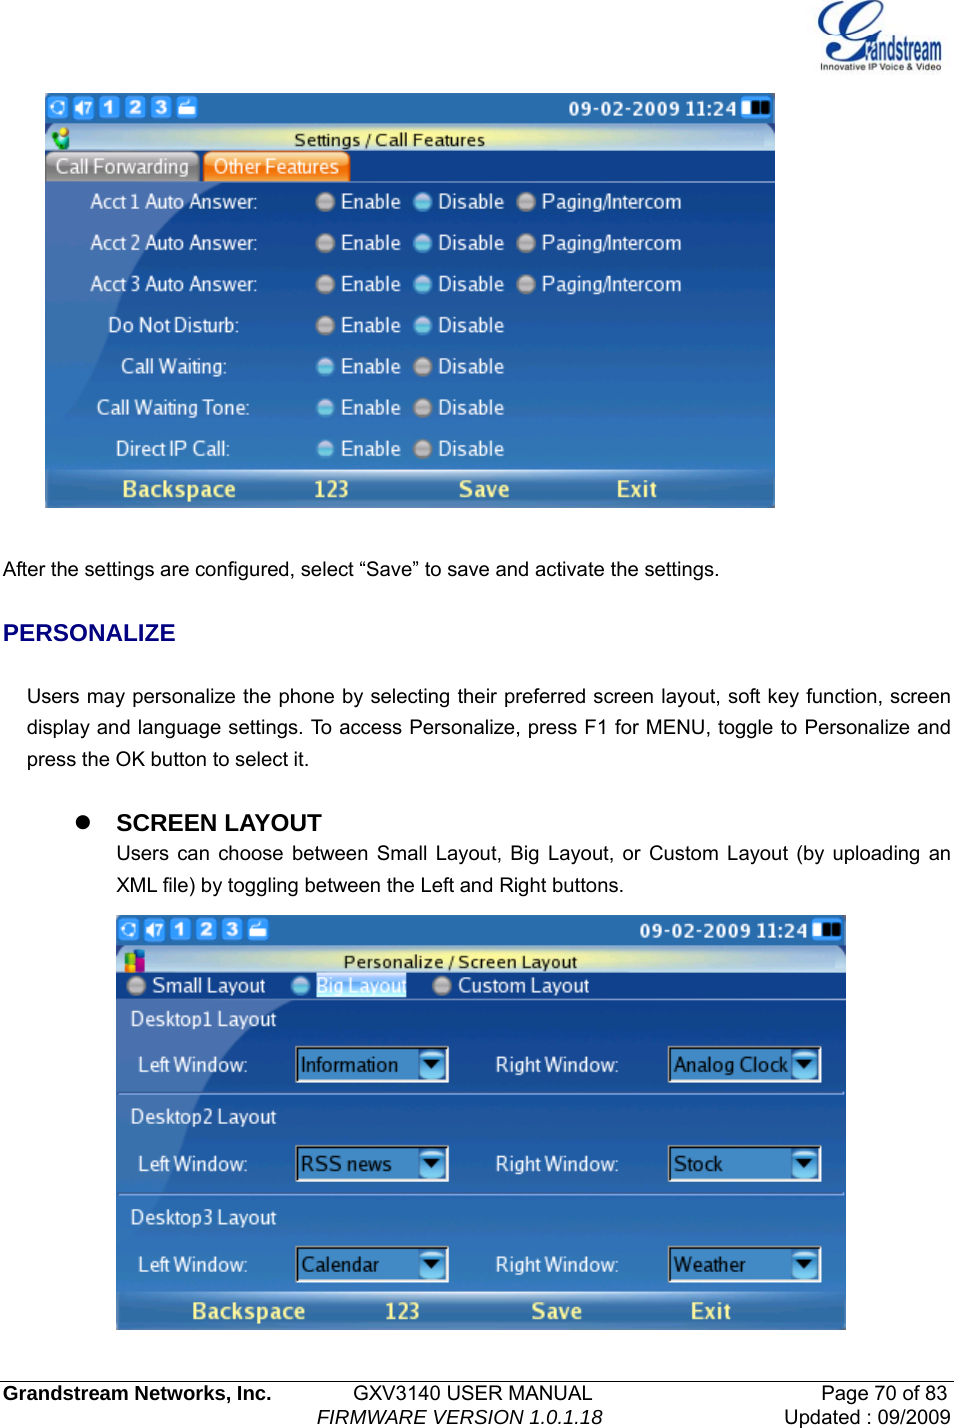   Grandstream Networks, Inc.        GXV3140 USER MANUAL                       Page 70 of 83                                FIRMWARE VERSION 1.0.1.18 Updated : 09/2009    After the settings are configured, select “Save” to save and activate the settings.      PERSONALIZE   Users may personalize the phone by selecting their preferred screen layout, soft key function, screen display and language settings. To access Personalize, press F1 for MENU, toggle to Personalize and press the OK button to select it.    z SCREEN LAYOUT Users can choose between Small Layout, Big Layout, or Custom Layout (by uploading an XML file) by toggling between the Left and Right buttons.      